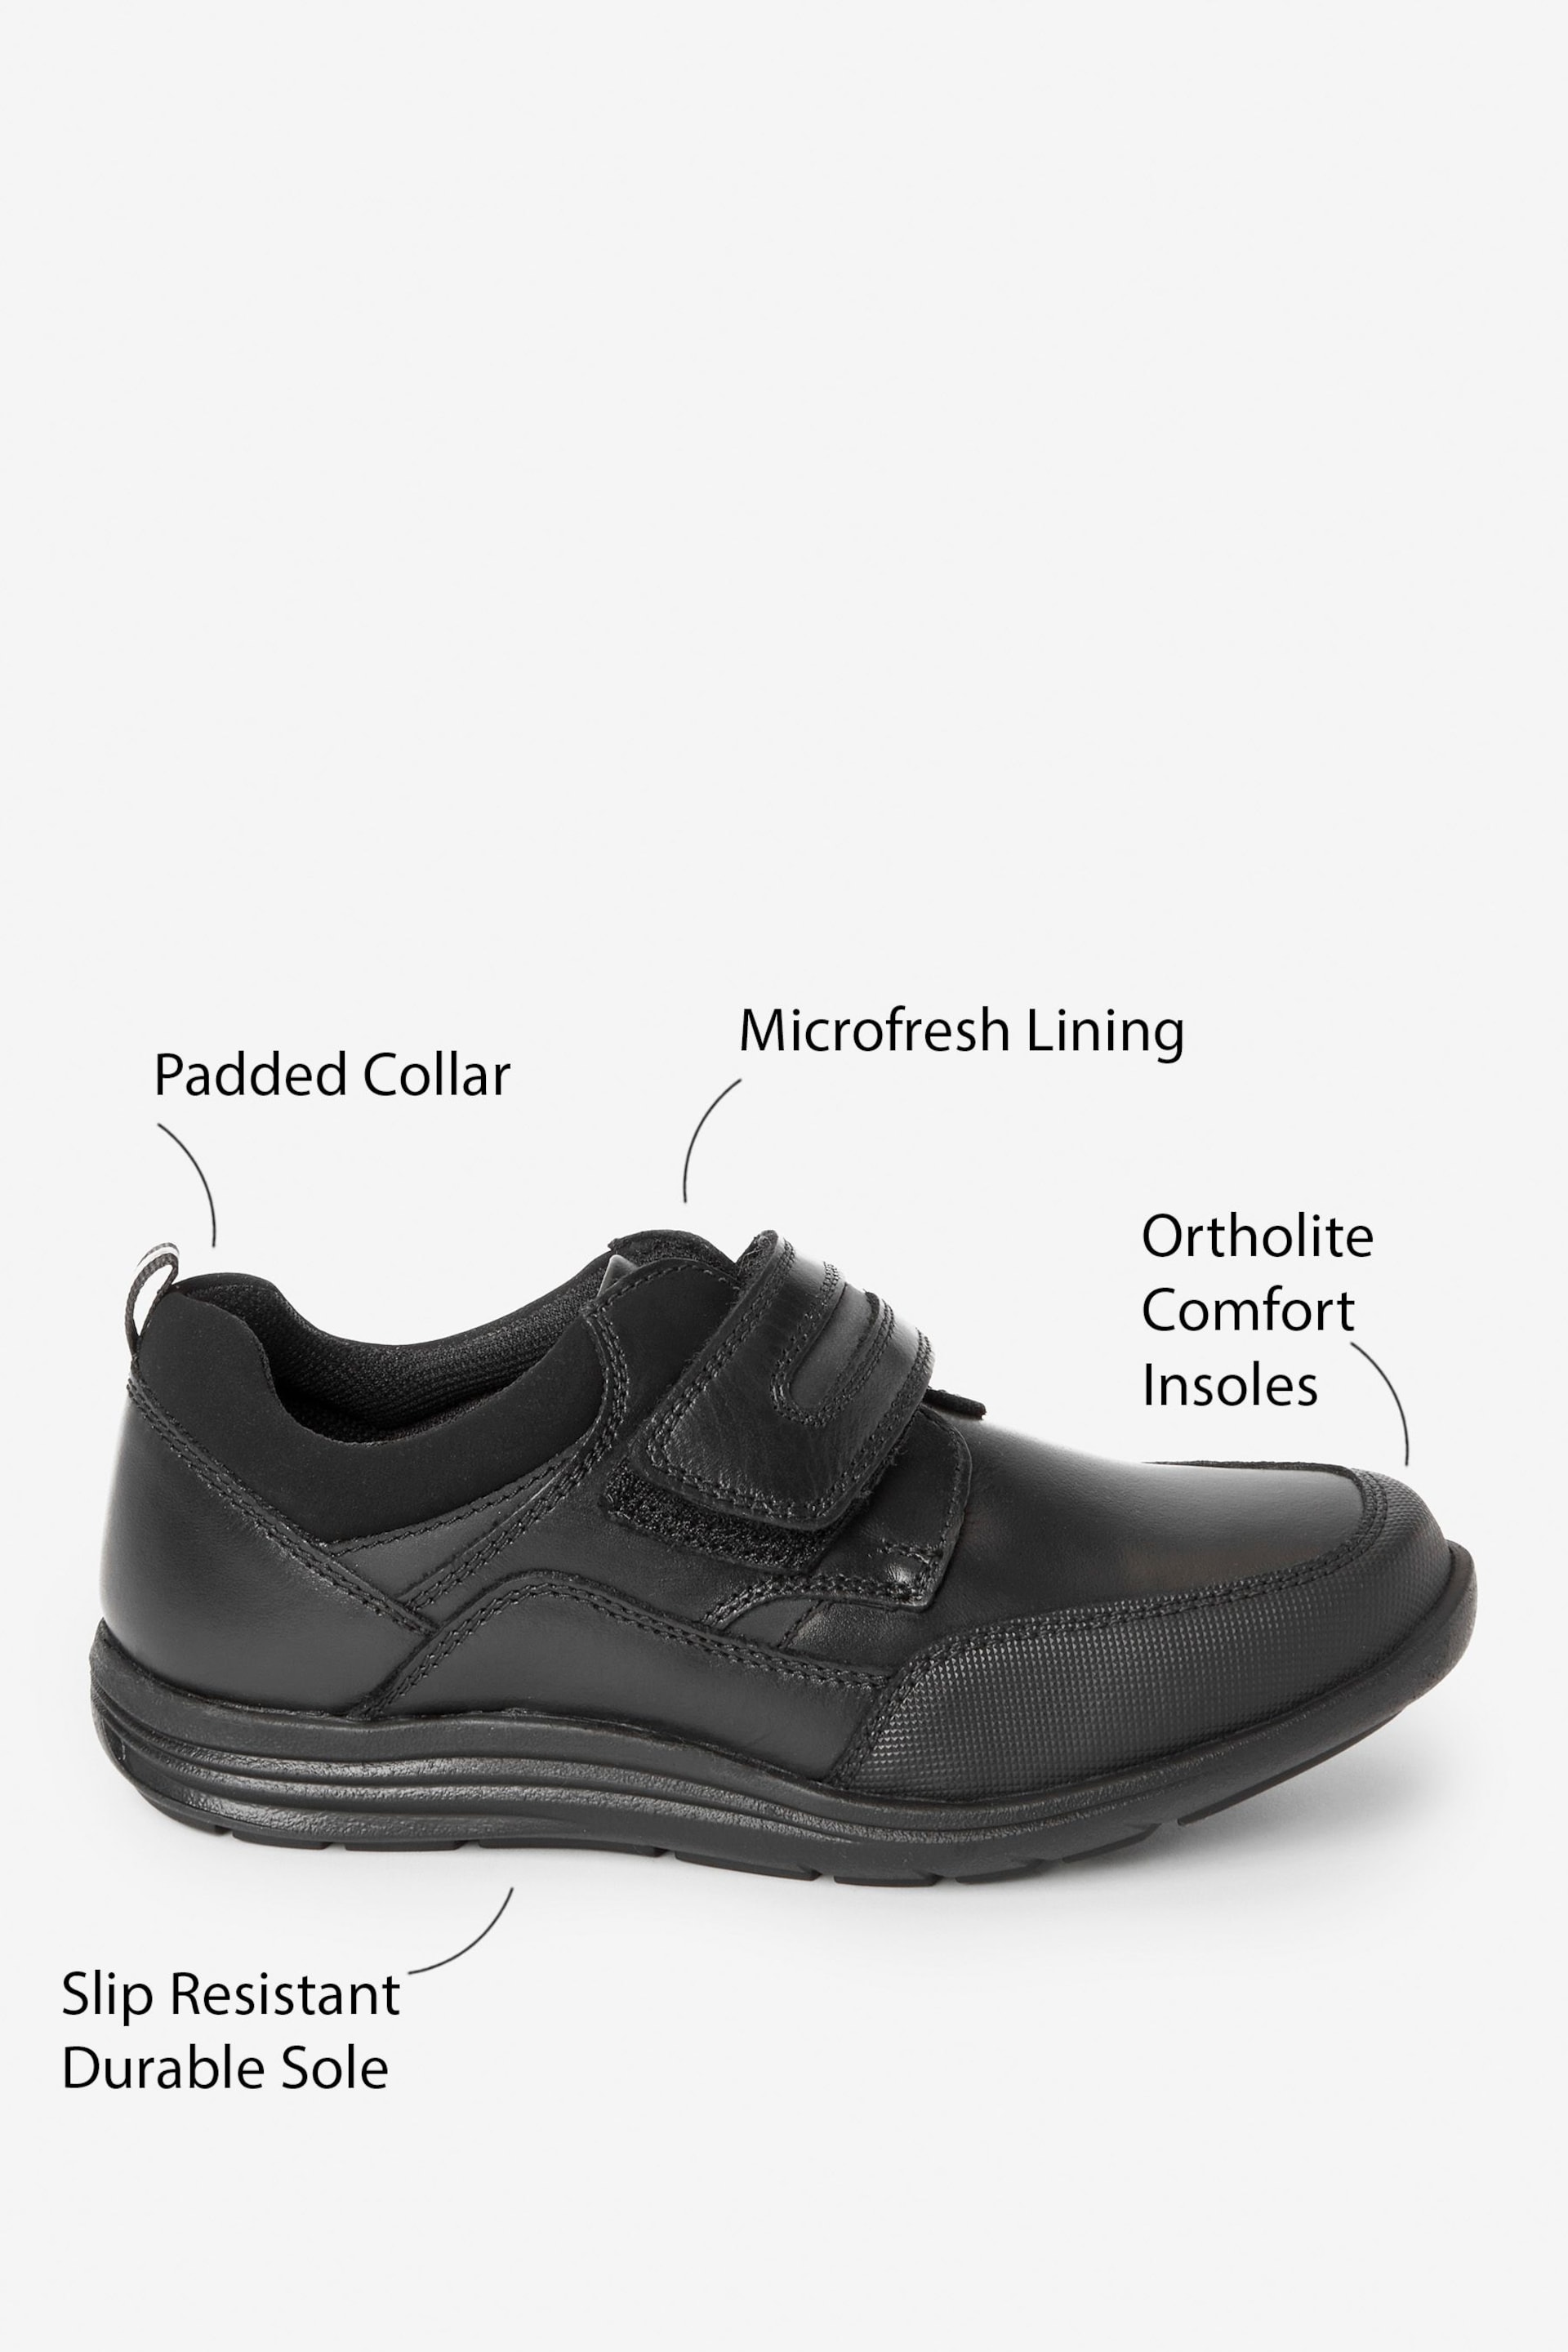 Black Narrow Fit (E) School Leather Single Strap Shoes - Image 6 of 6